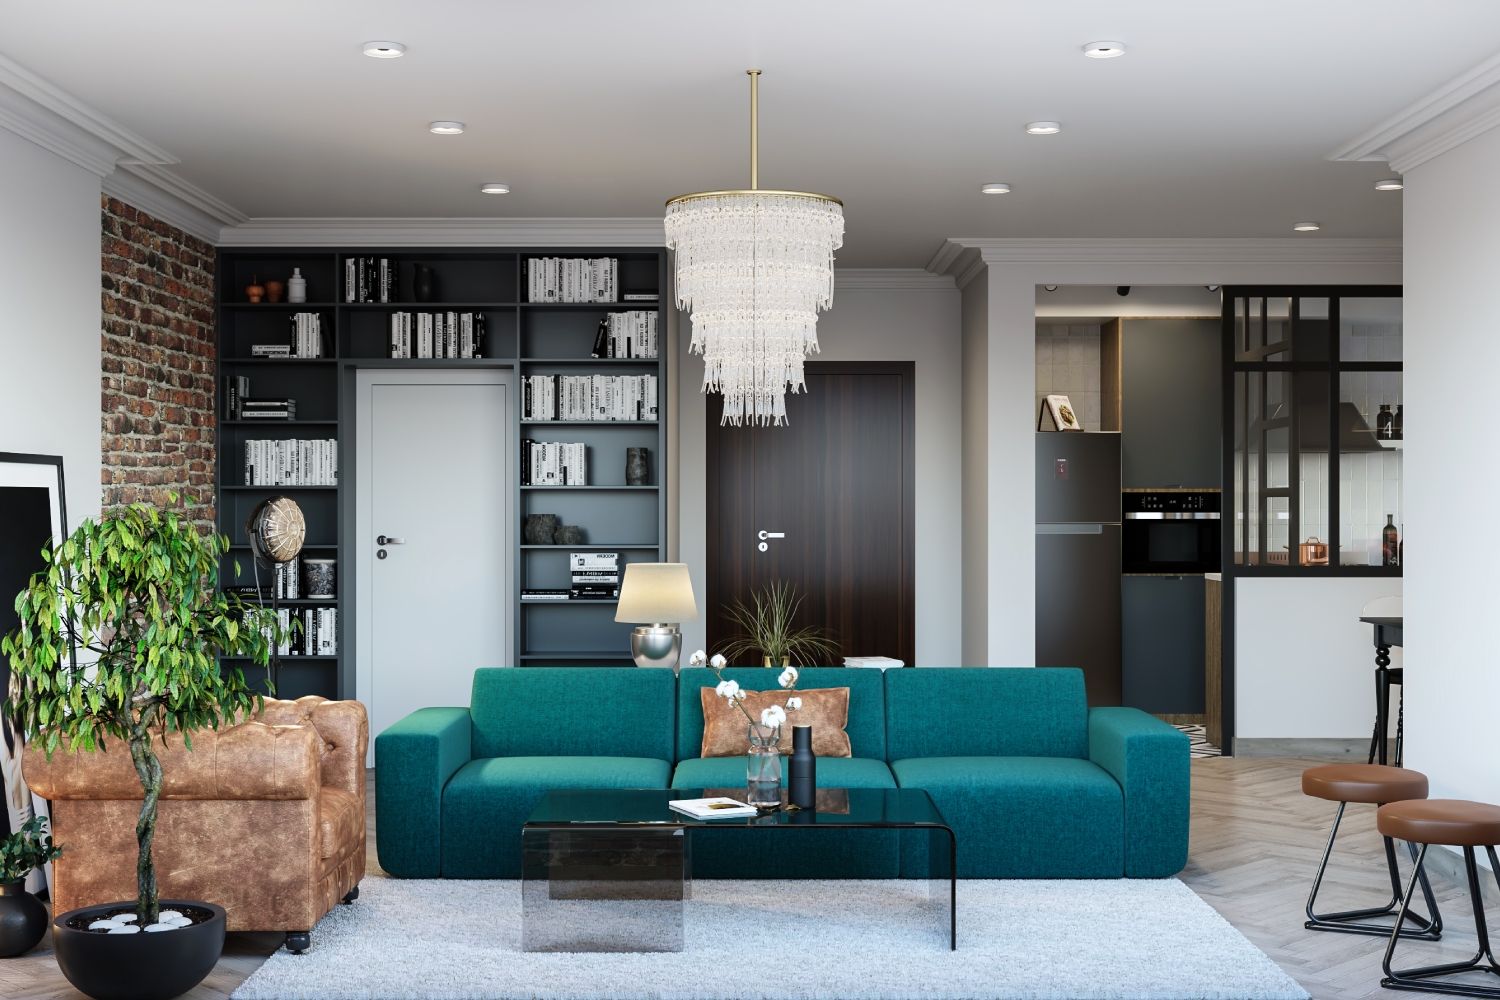 Eclectic Living Room Design With Turquoise Tight Back Sofa And Tan Leather Accent Chair